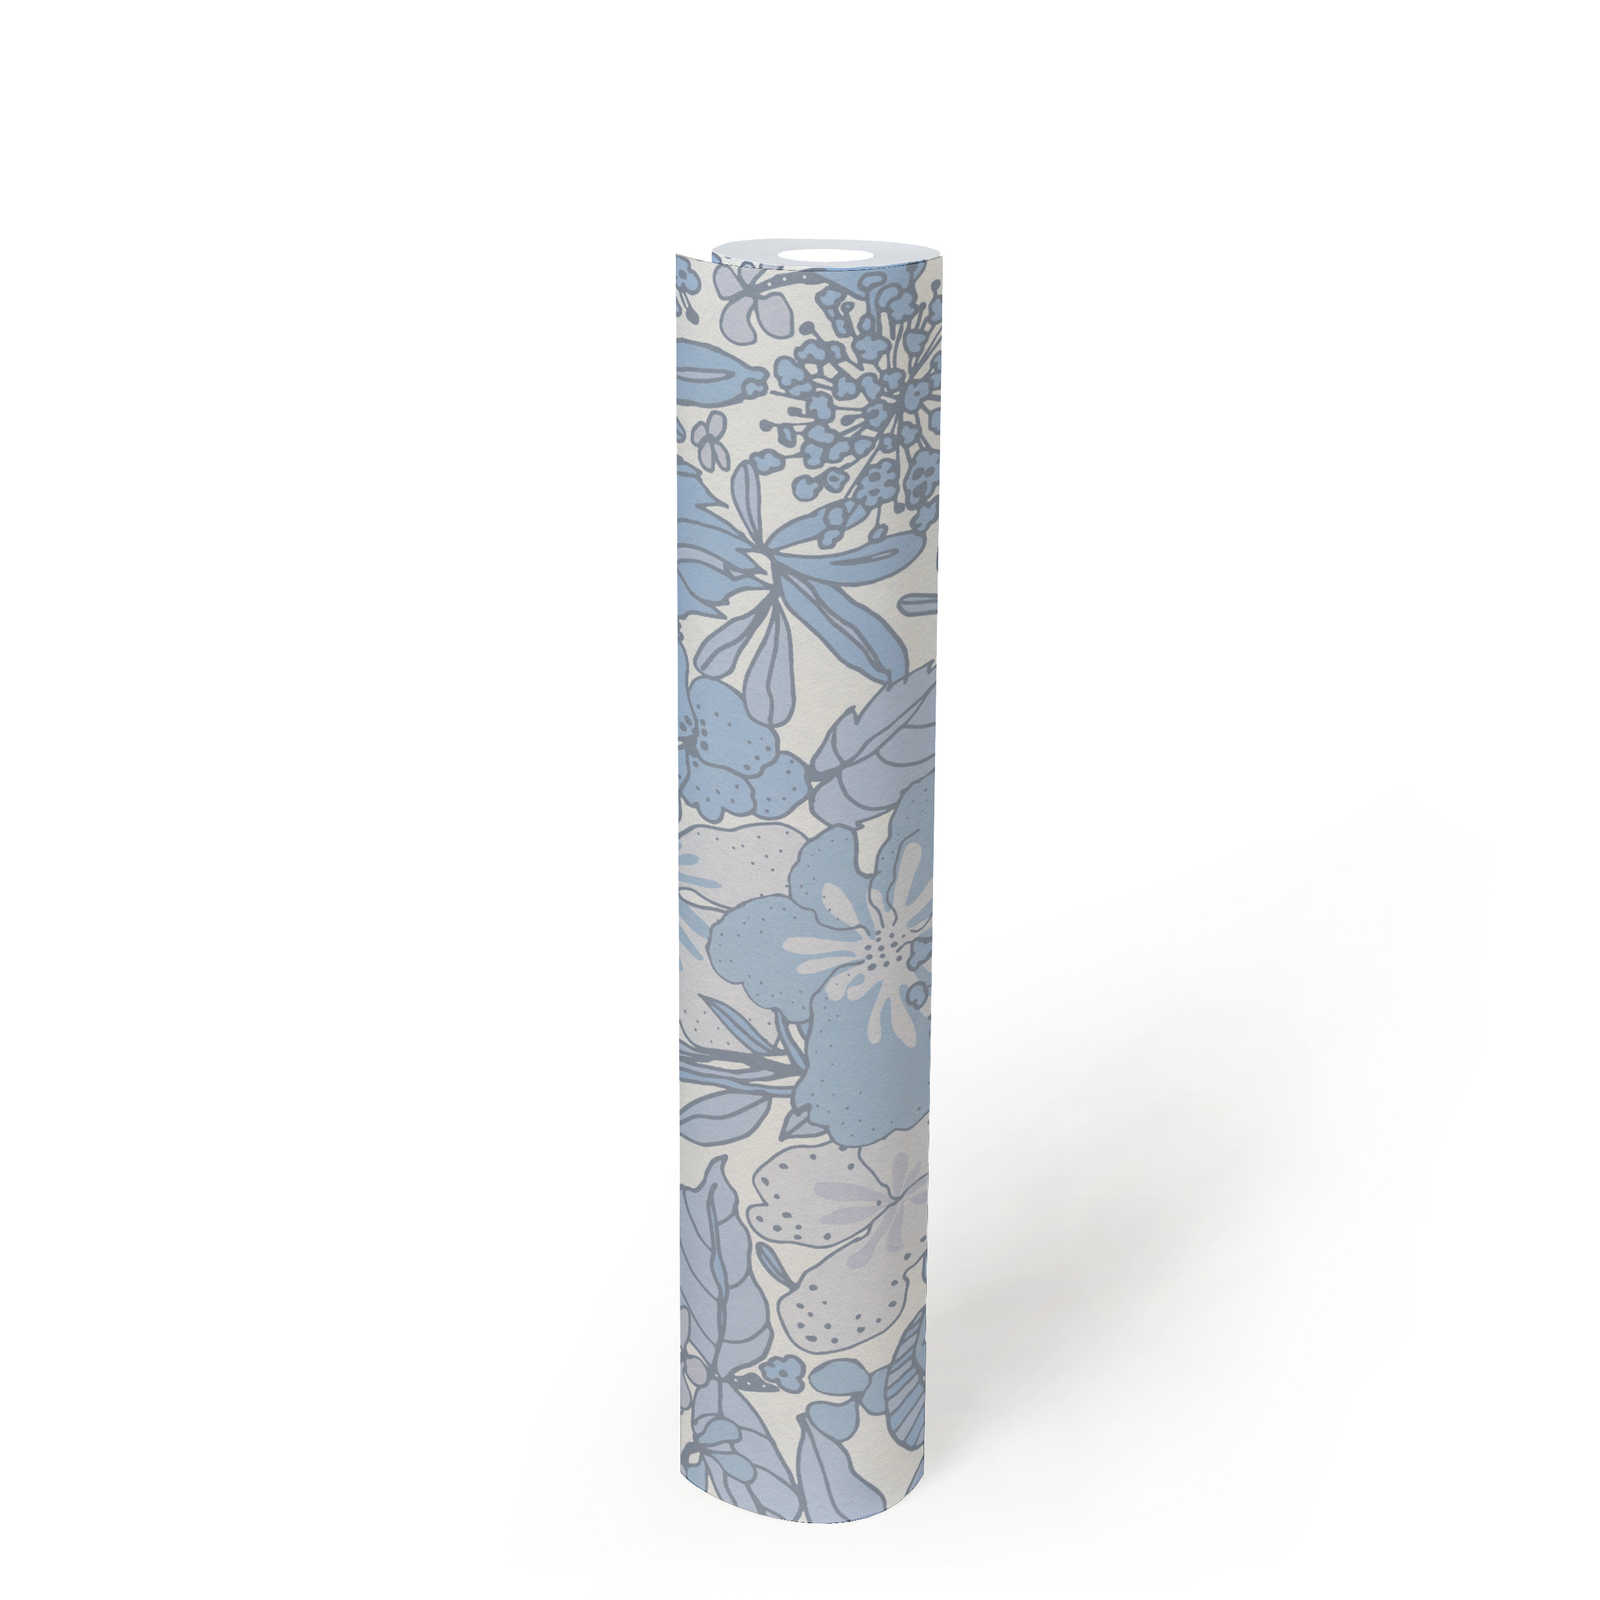             Wallpaper blue & white with 70s retro floral pattern - grey, blue, white
        